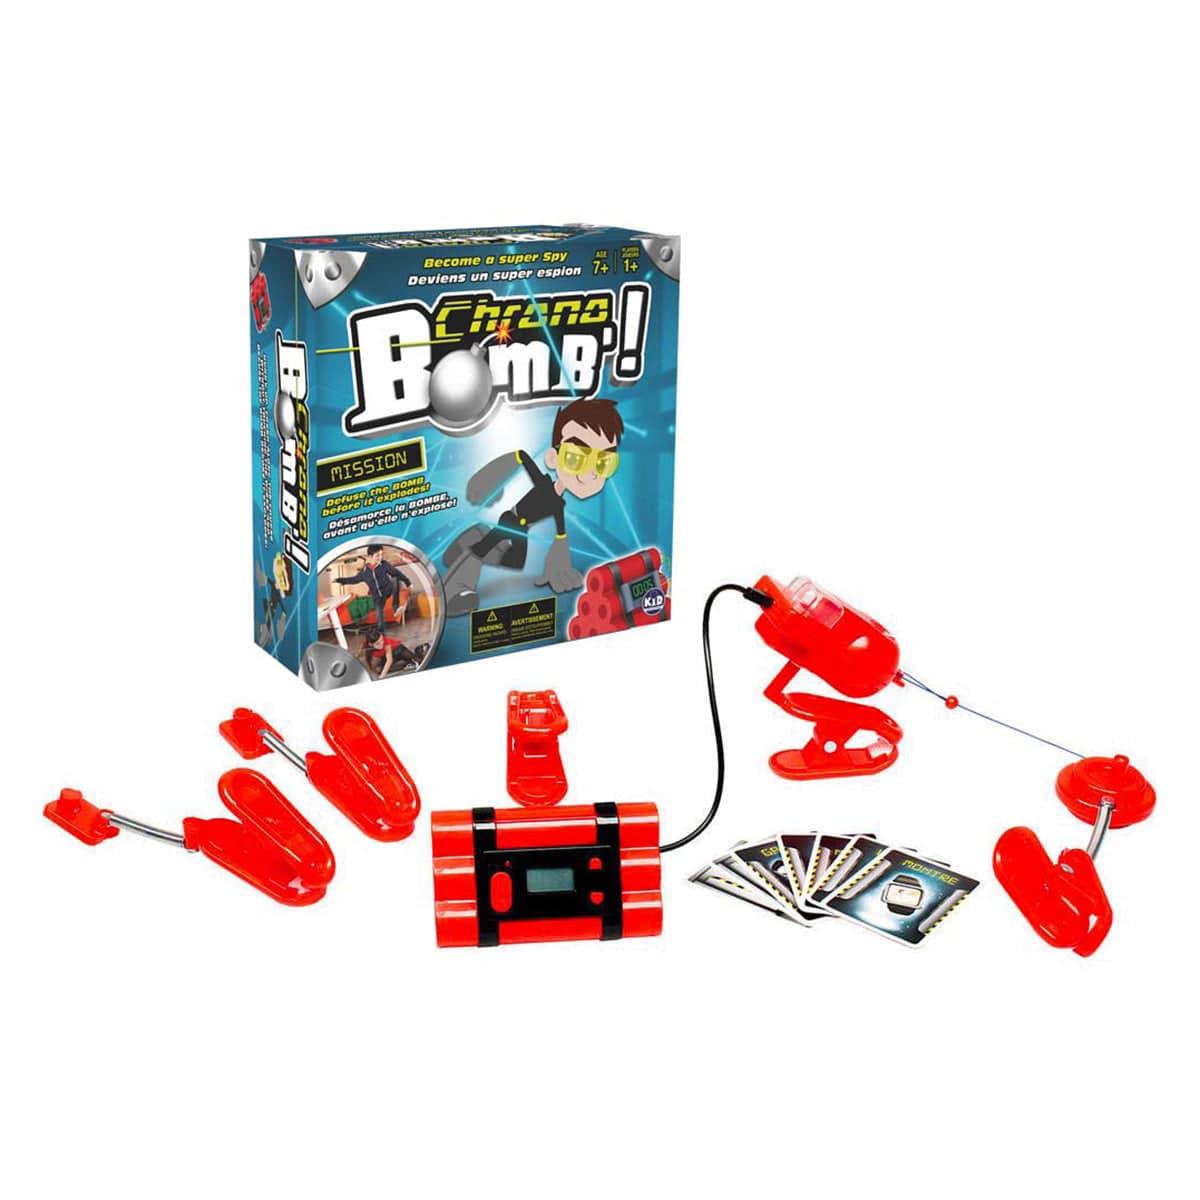 EP Line Chrono Bomb Action and thrilling game, recommended age 7+ - VMD  parfumerie - drogerie